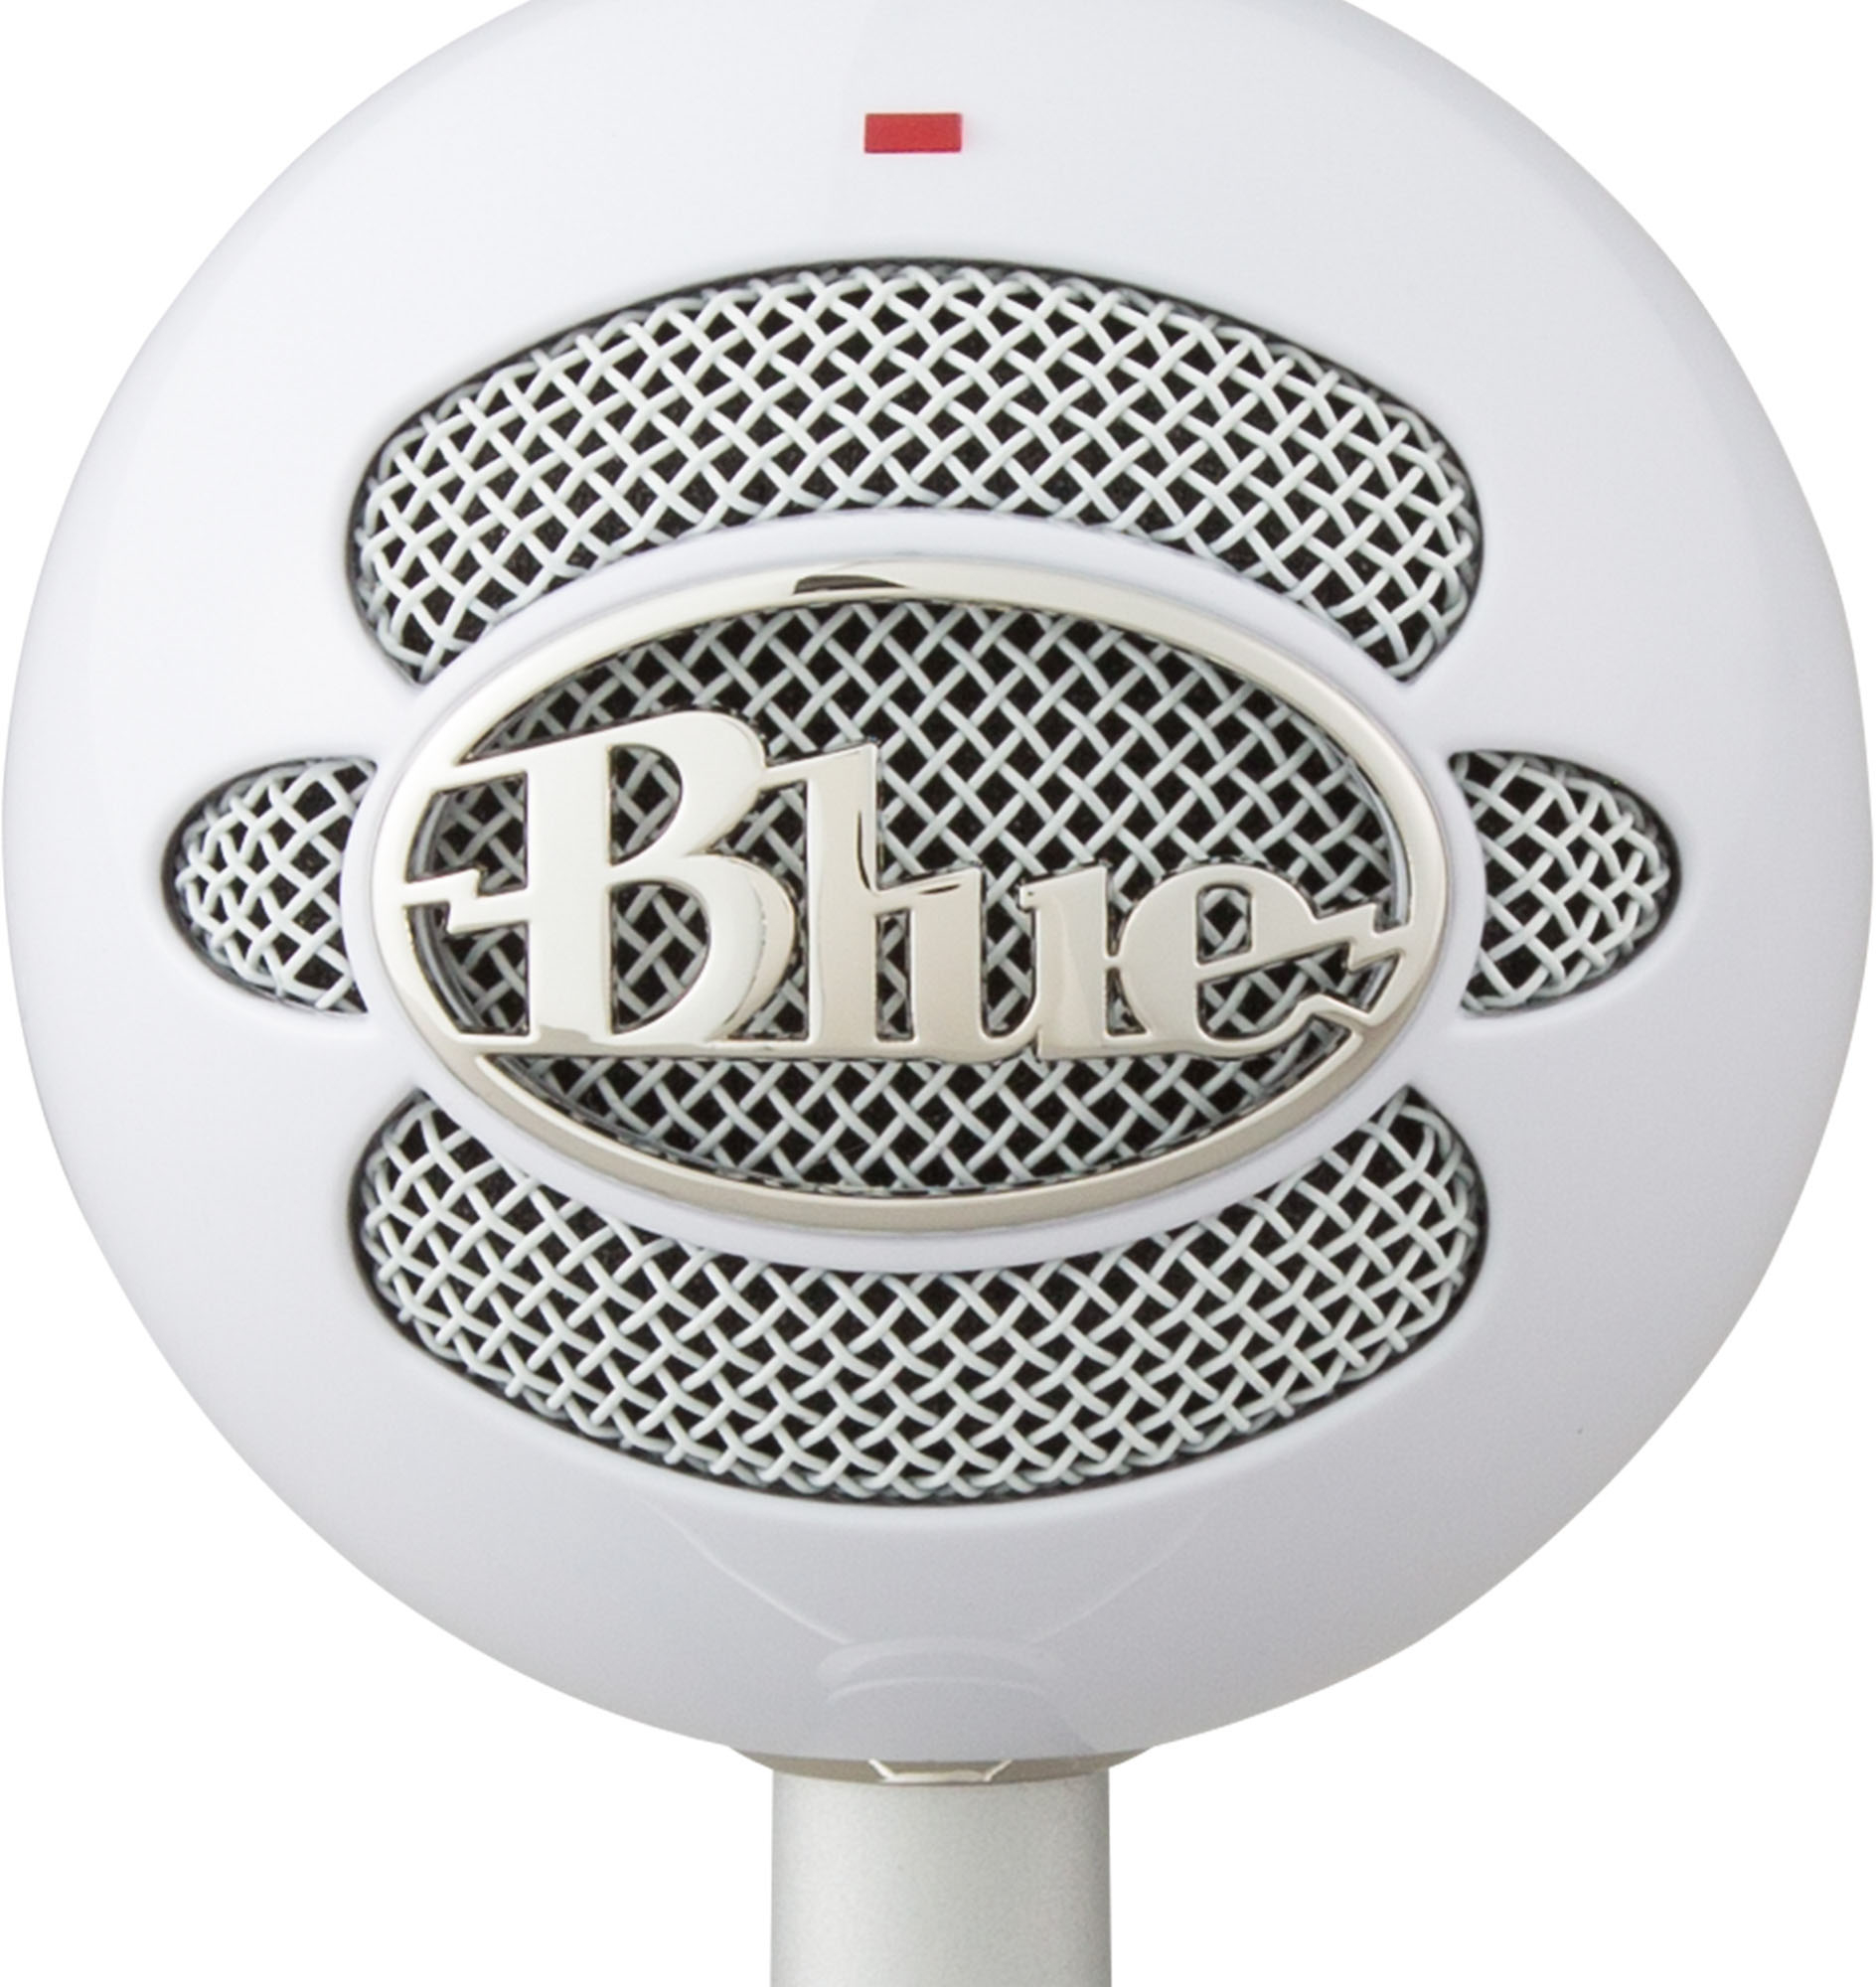 Logitech Blue Snowball USB Microphone - Cardioid & Omnidirectional, for  PC/Mac Recording, Podcasting, Gaming, Streaming - Retro Black